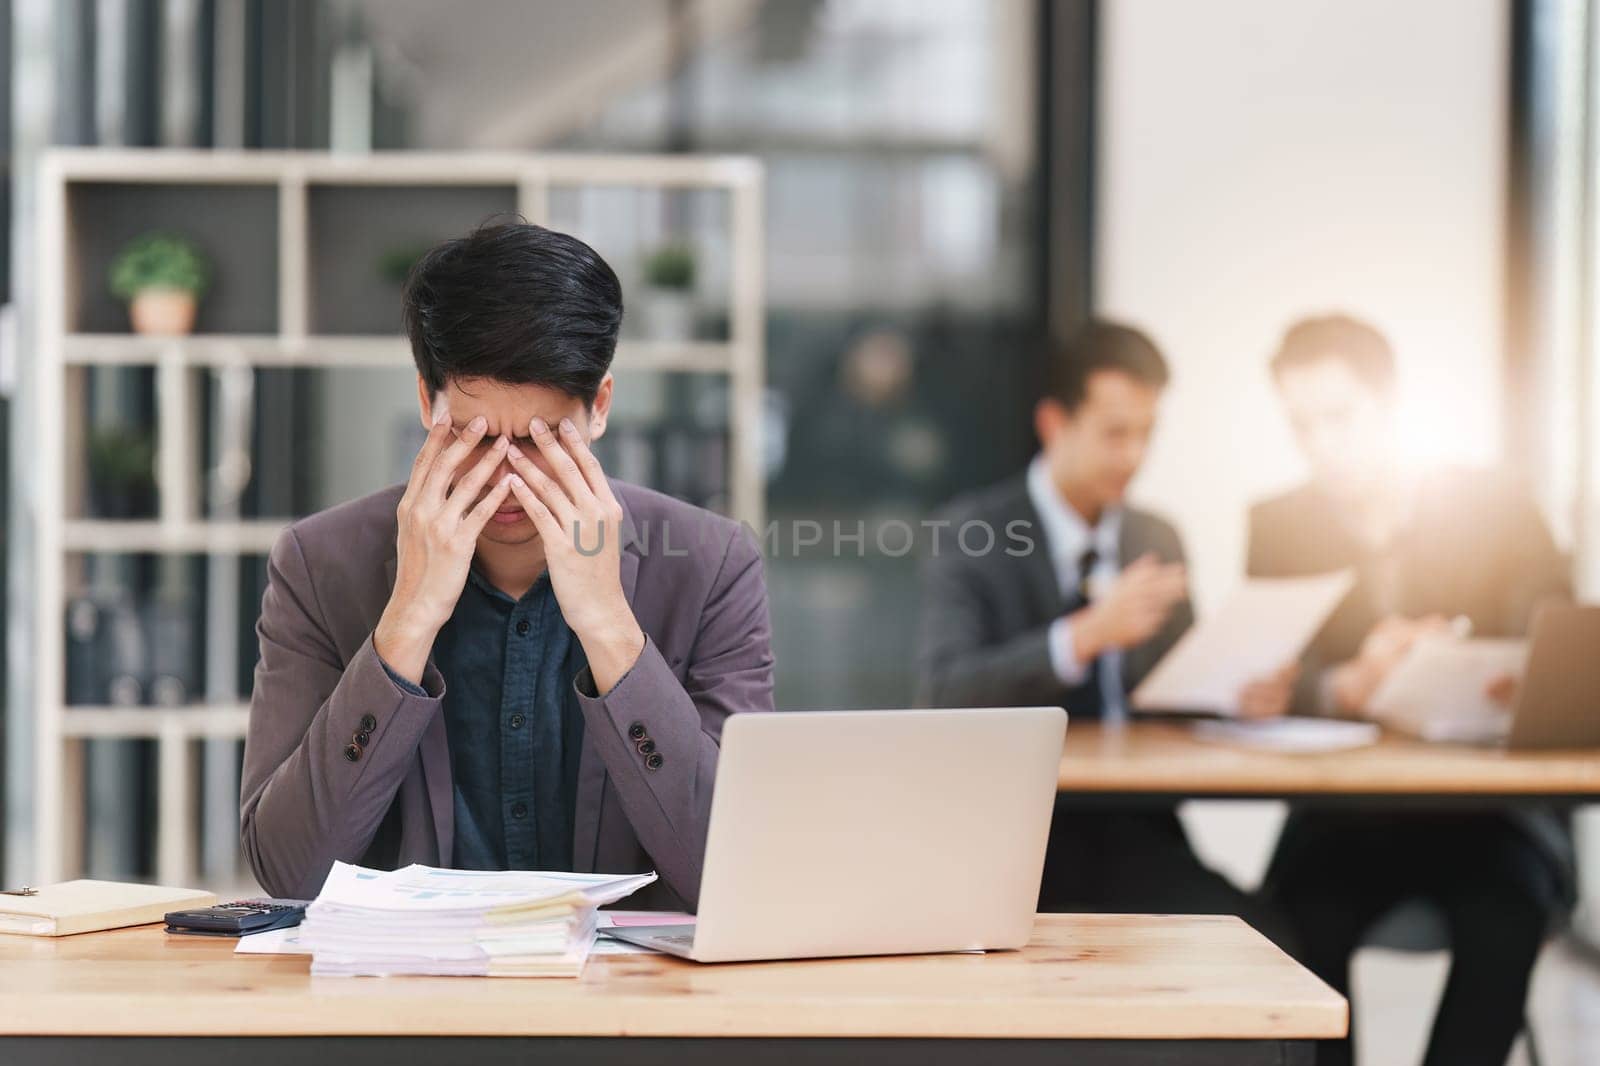 Stressed business person working and research strategy on laptop and looking worried, tired, finance, teamwork, Big data Graphs Charts concept by itchaznong